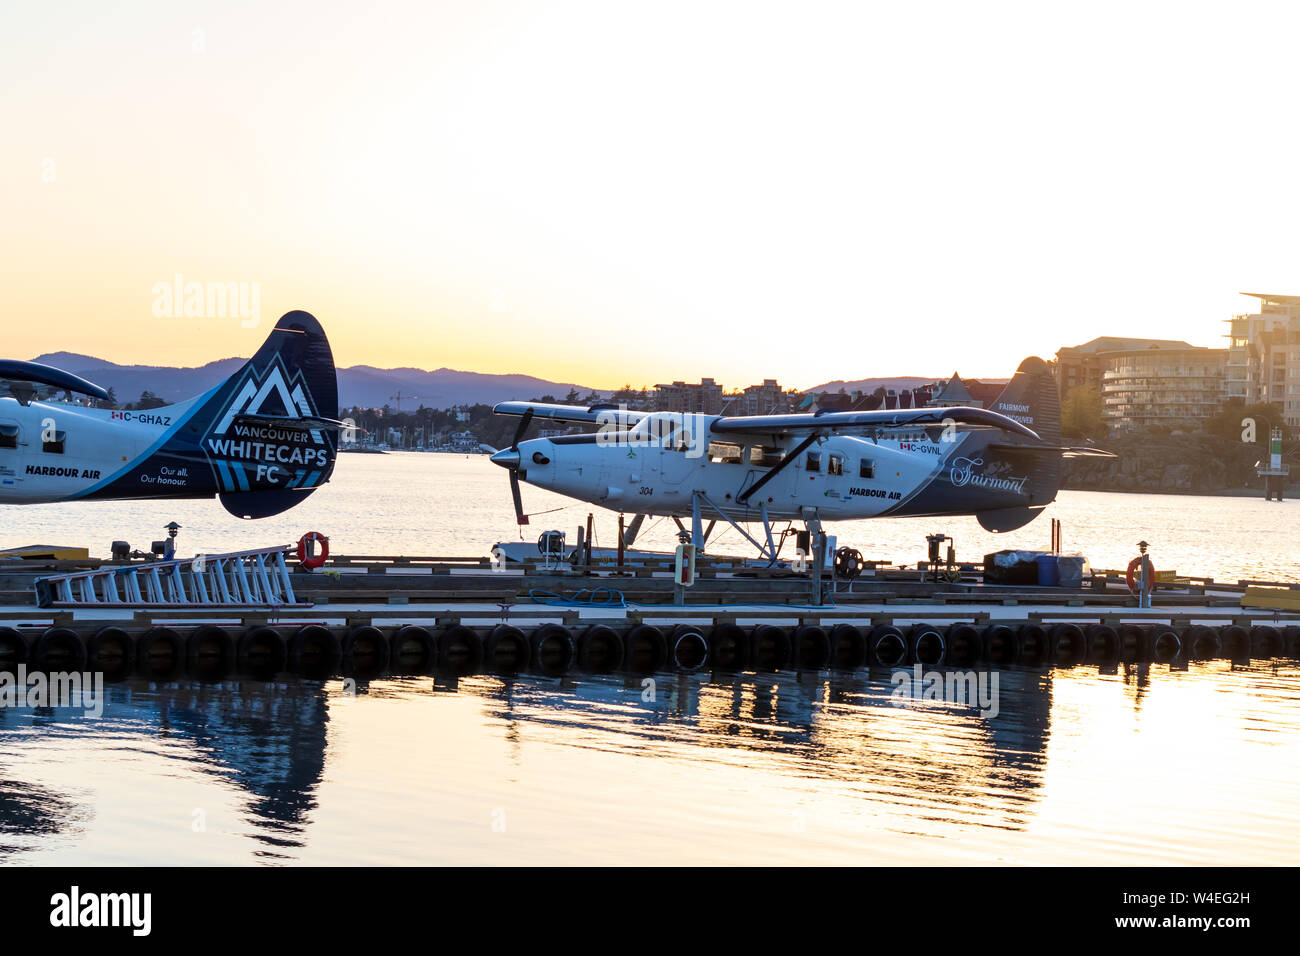 Harbour Air seaplanes docked at Victoria Harbour Airport during a beautiful sunset over the bay. Stock Photo